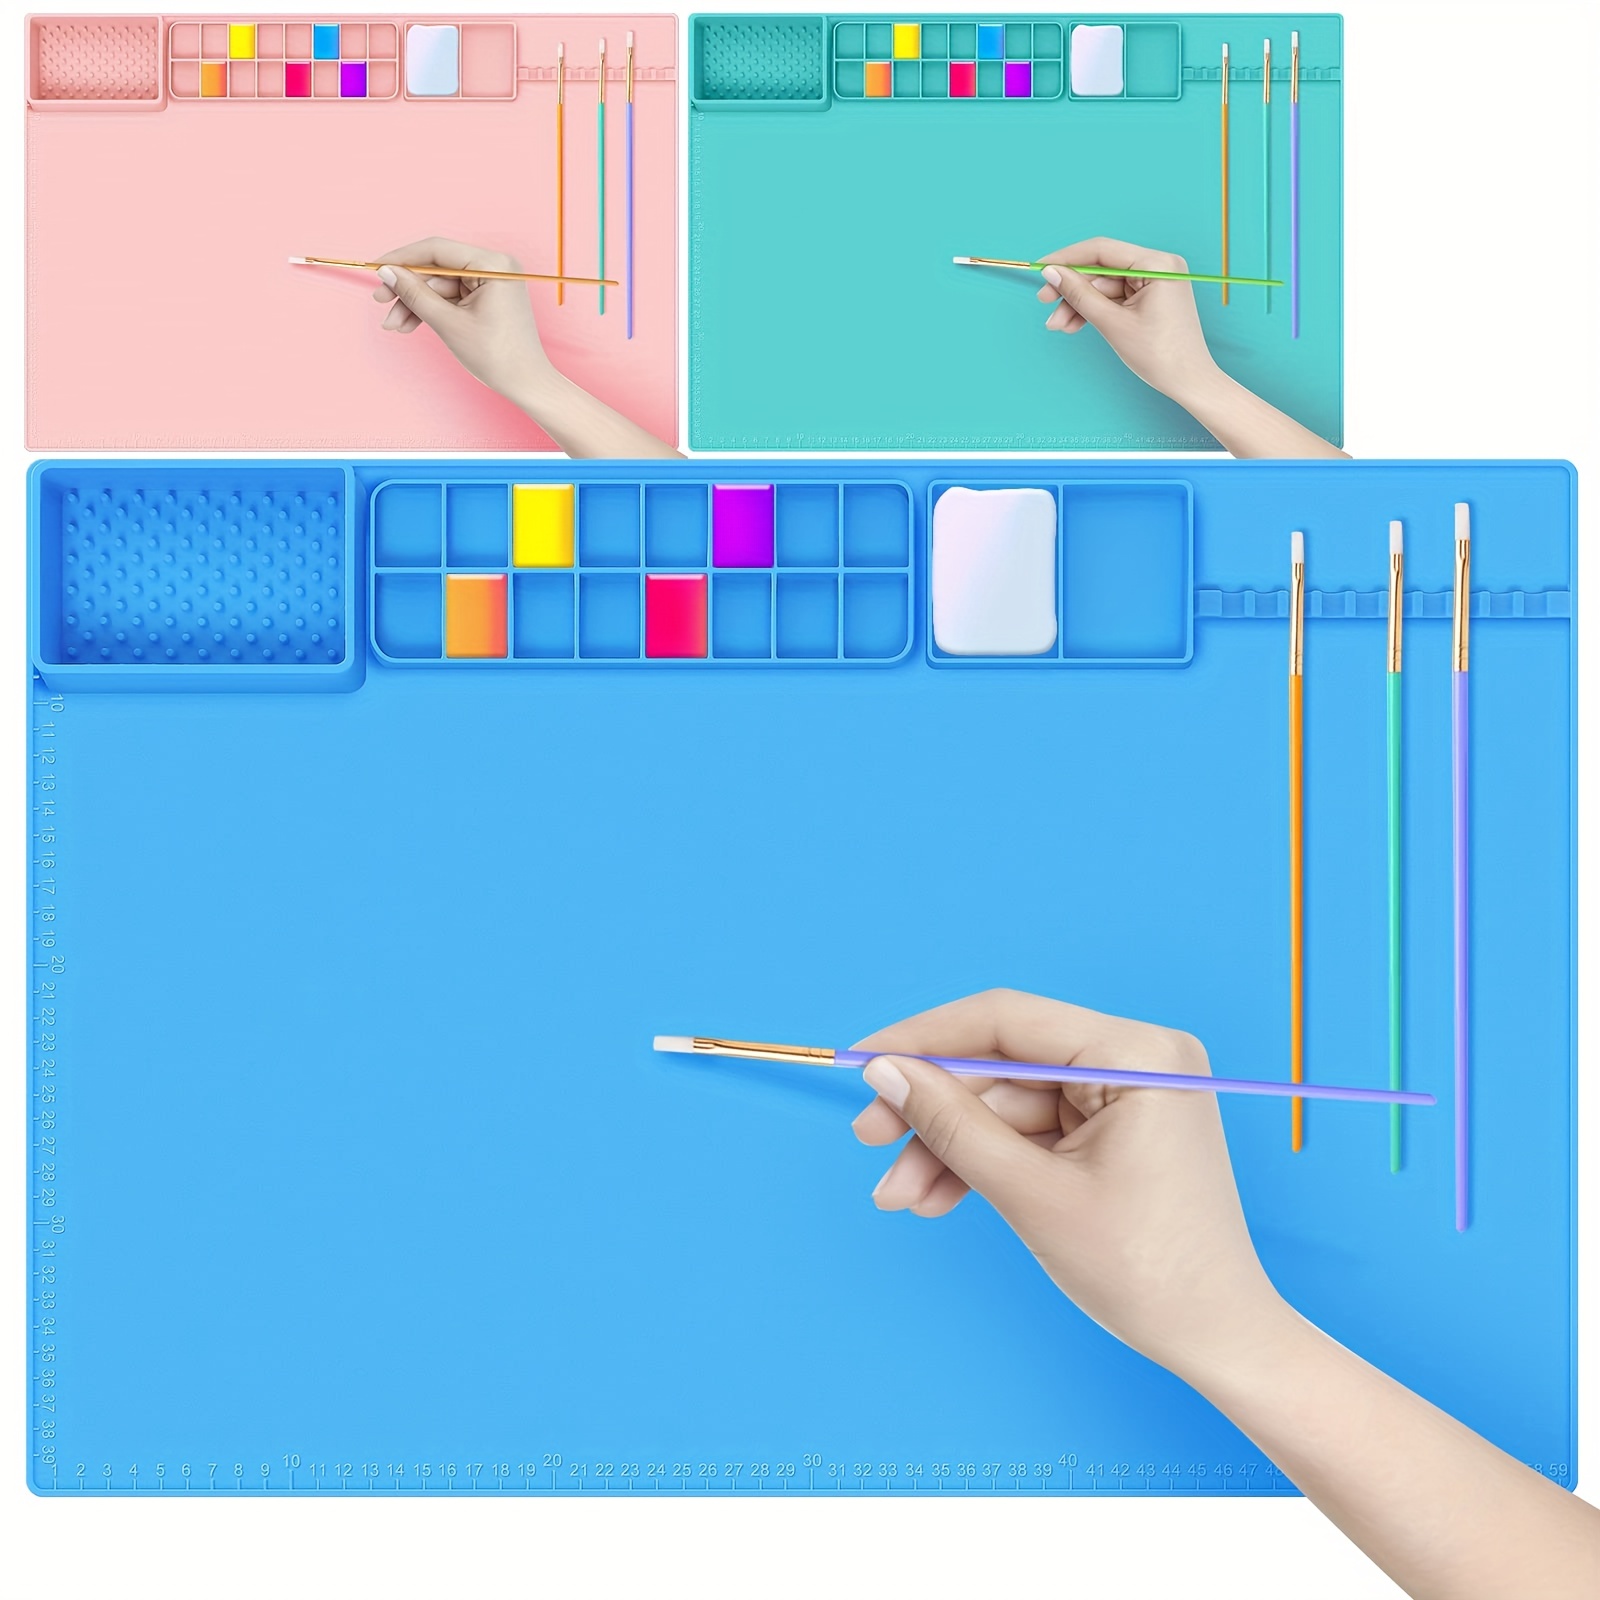 Create Masterpieces With Kids' Silicone Painting Mats - Art Crafts